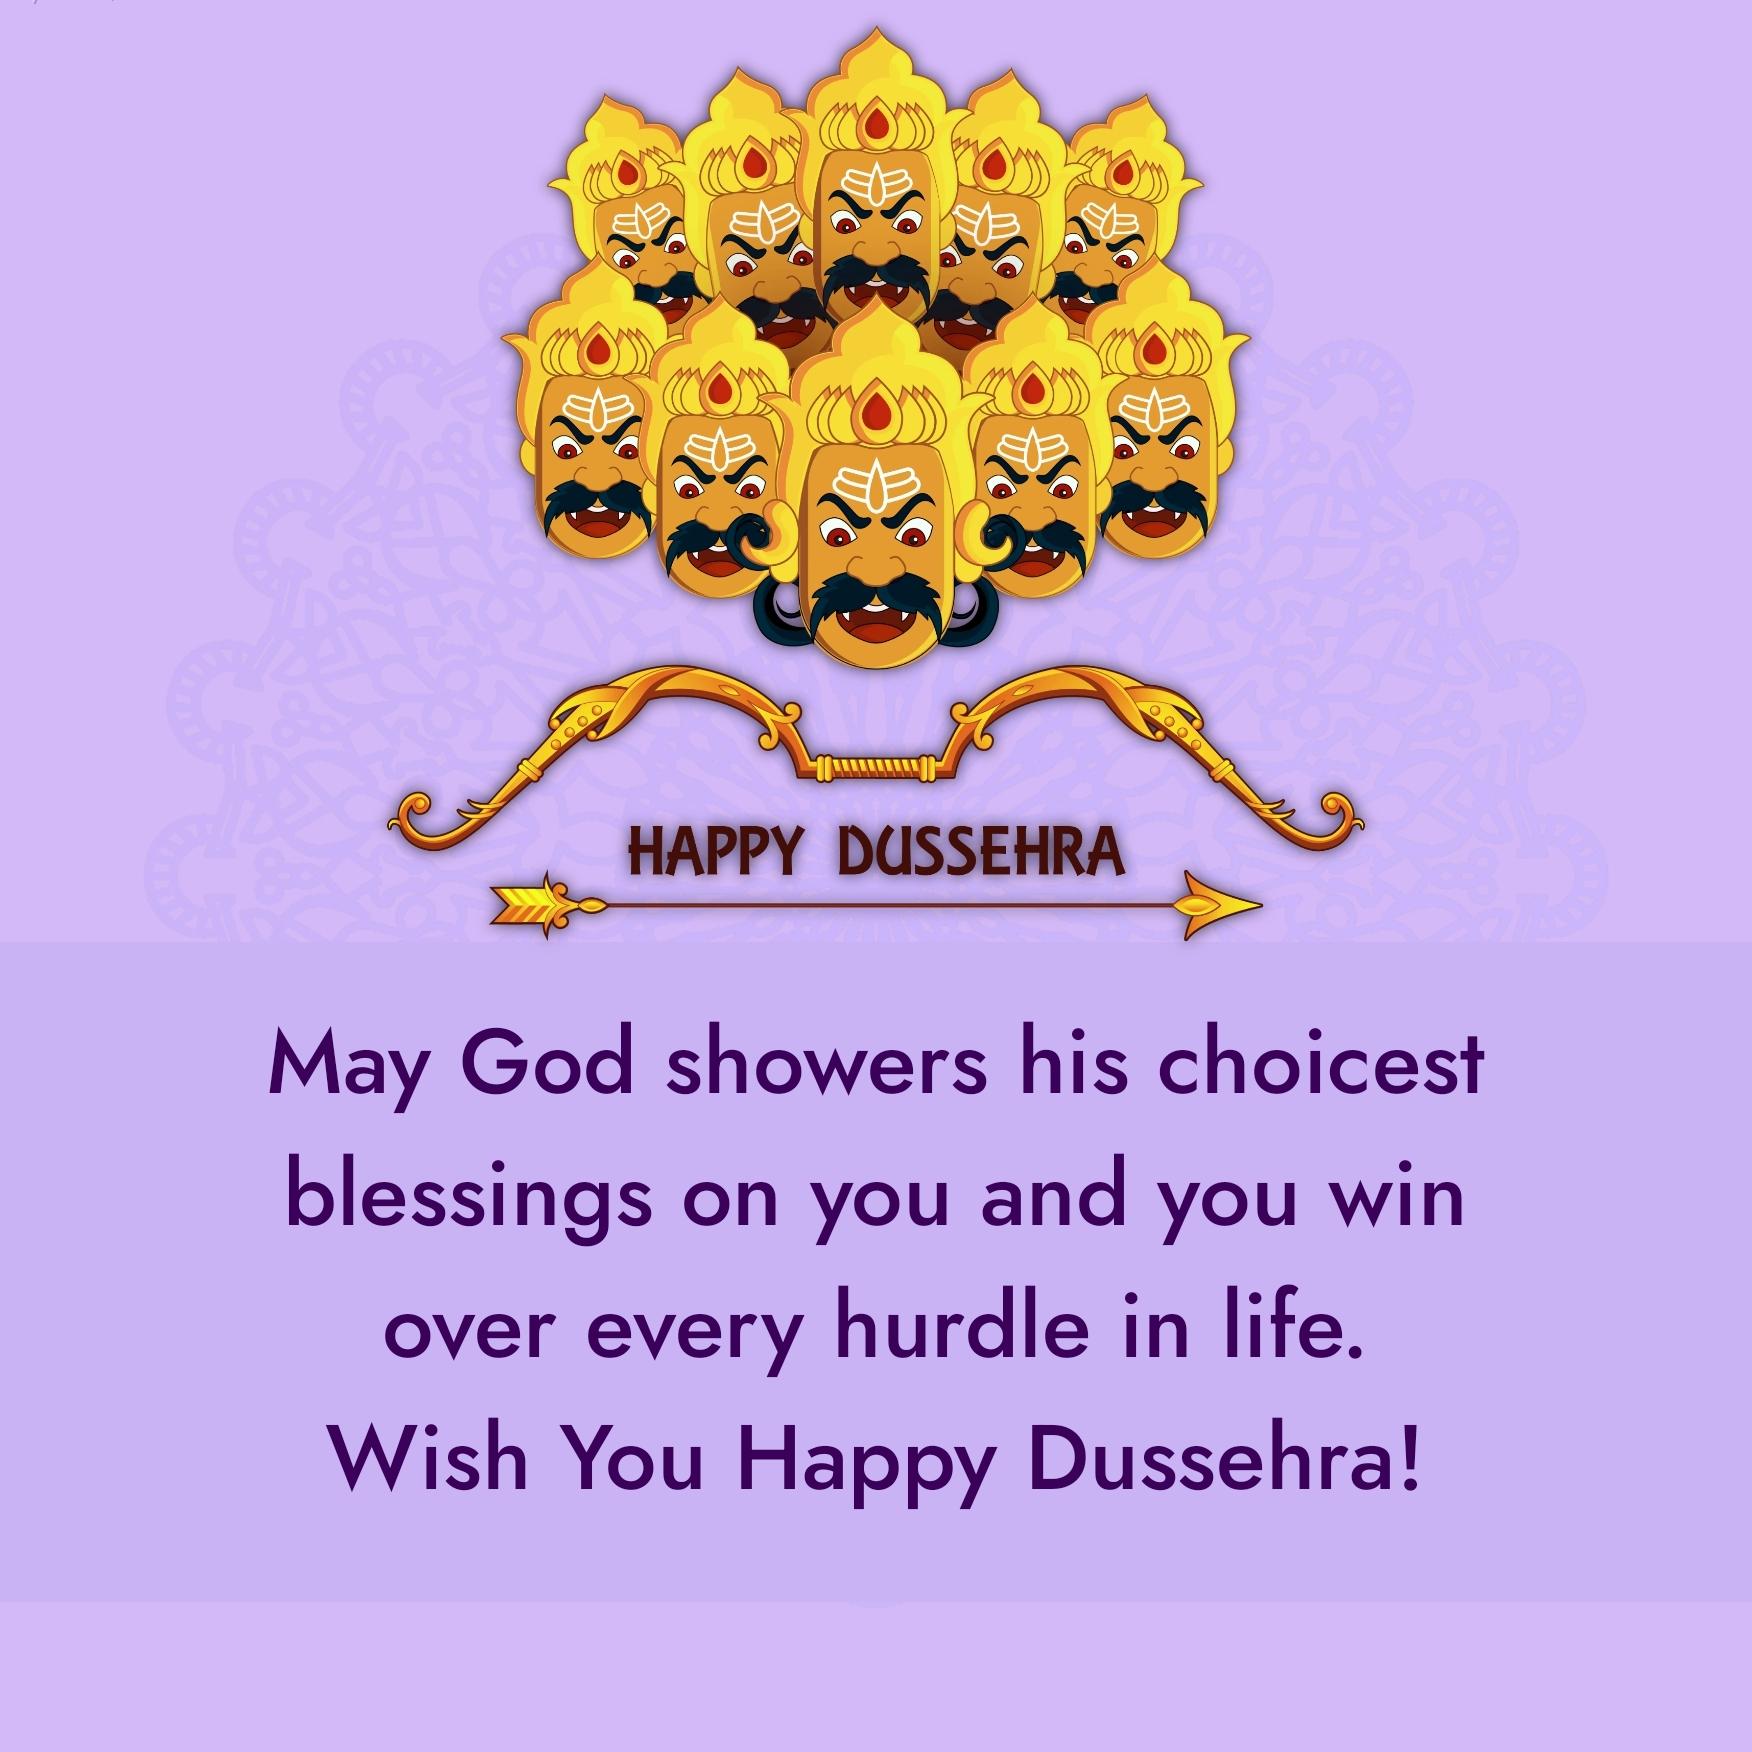 May God showers his choicest blessings on you